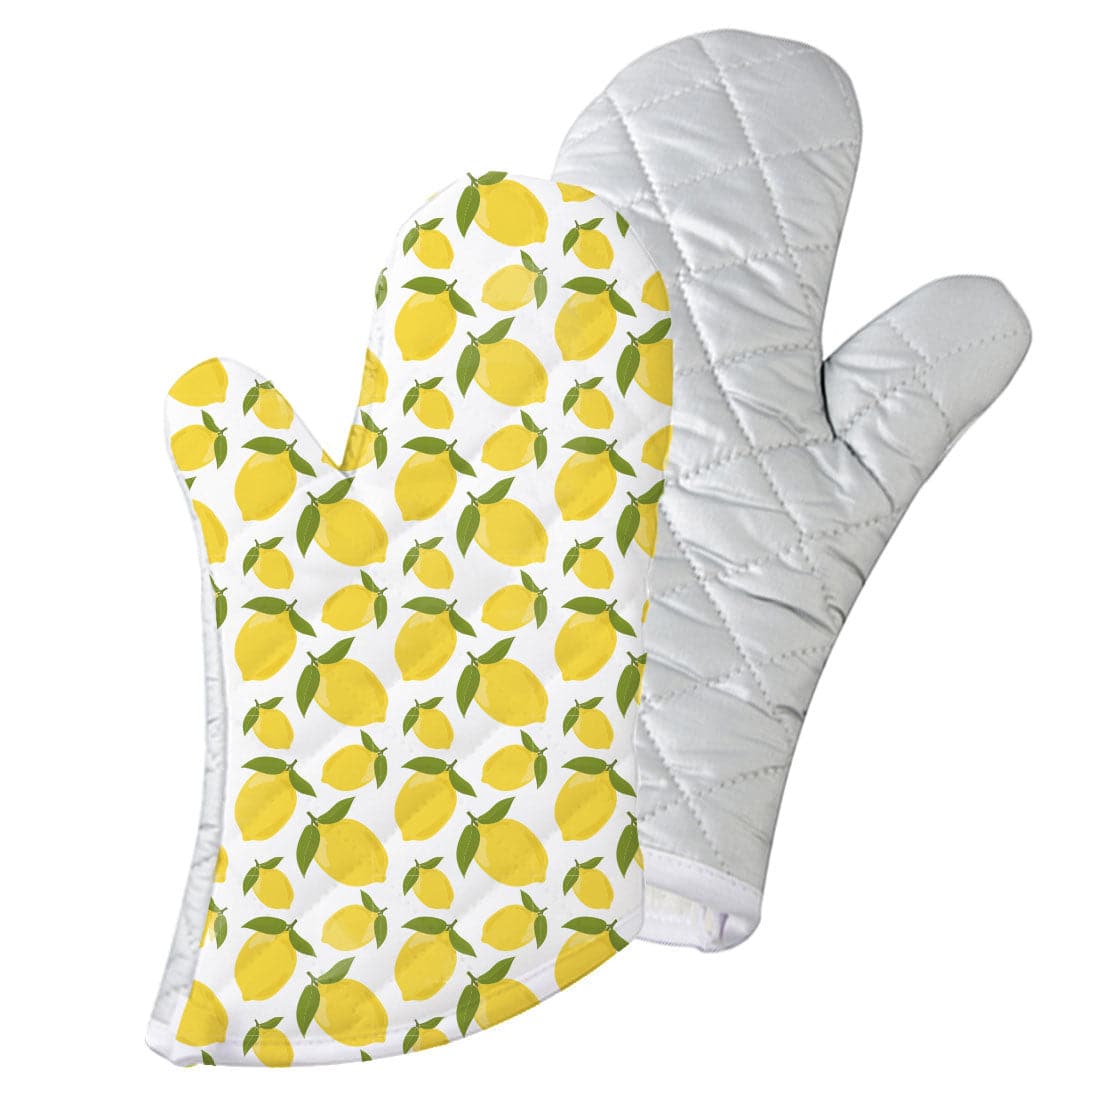 Pearl Coating™ Sublimation Right Hand Oven Mitt - Pack of 10 - Joto Imaging Supplies US